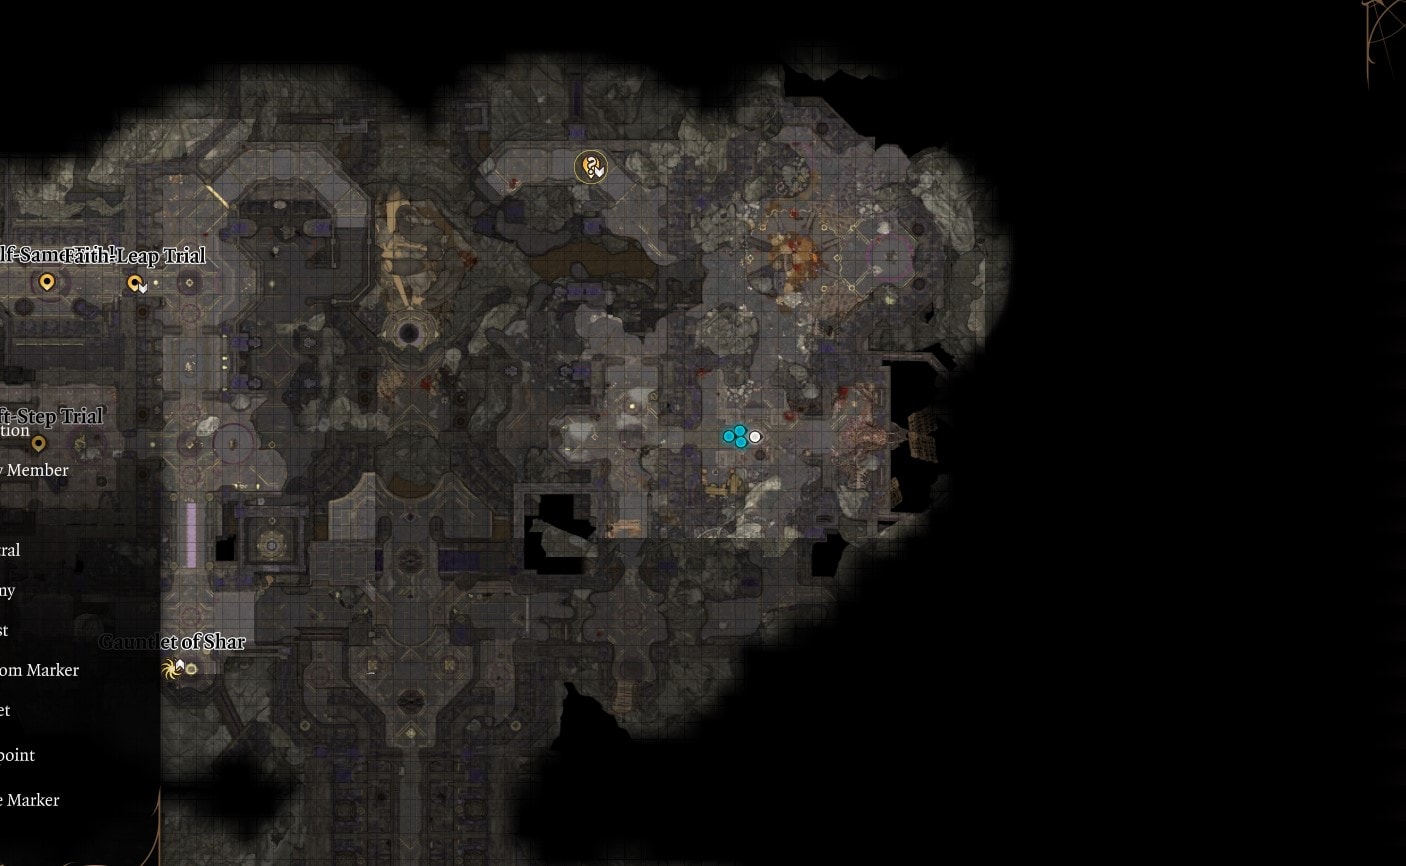 Screenshot of the Gauntlet of Shar map in Baldur's Gate 3 showing the location of Raphael's old enemy